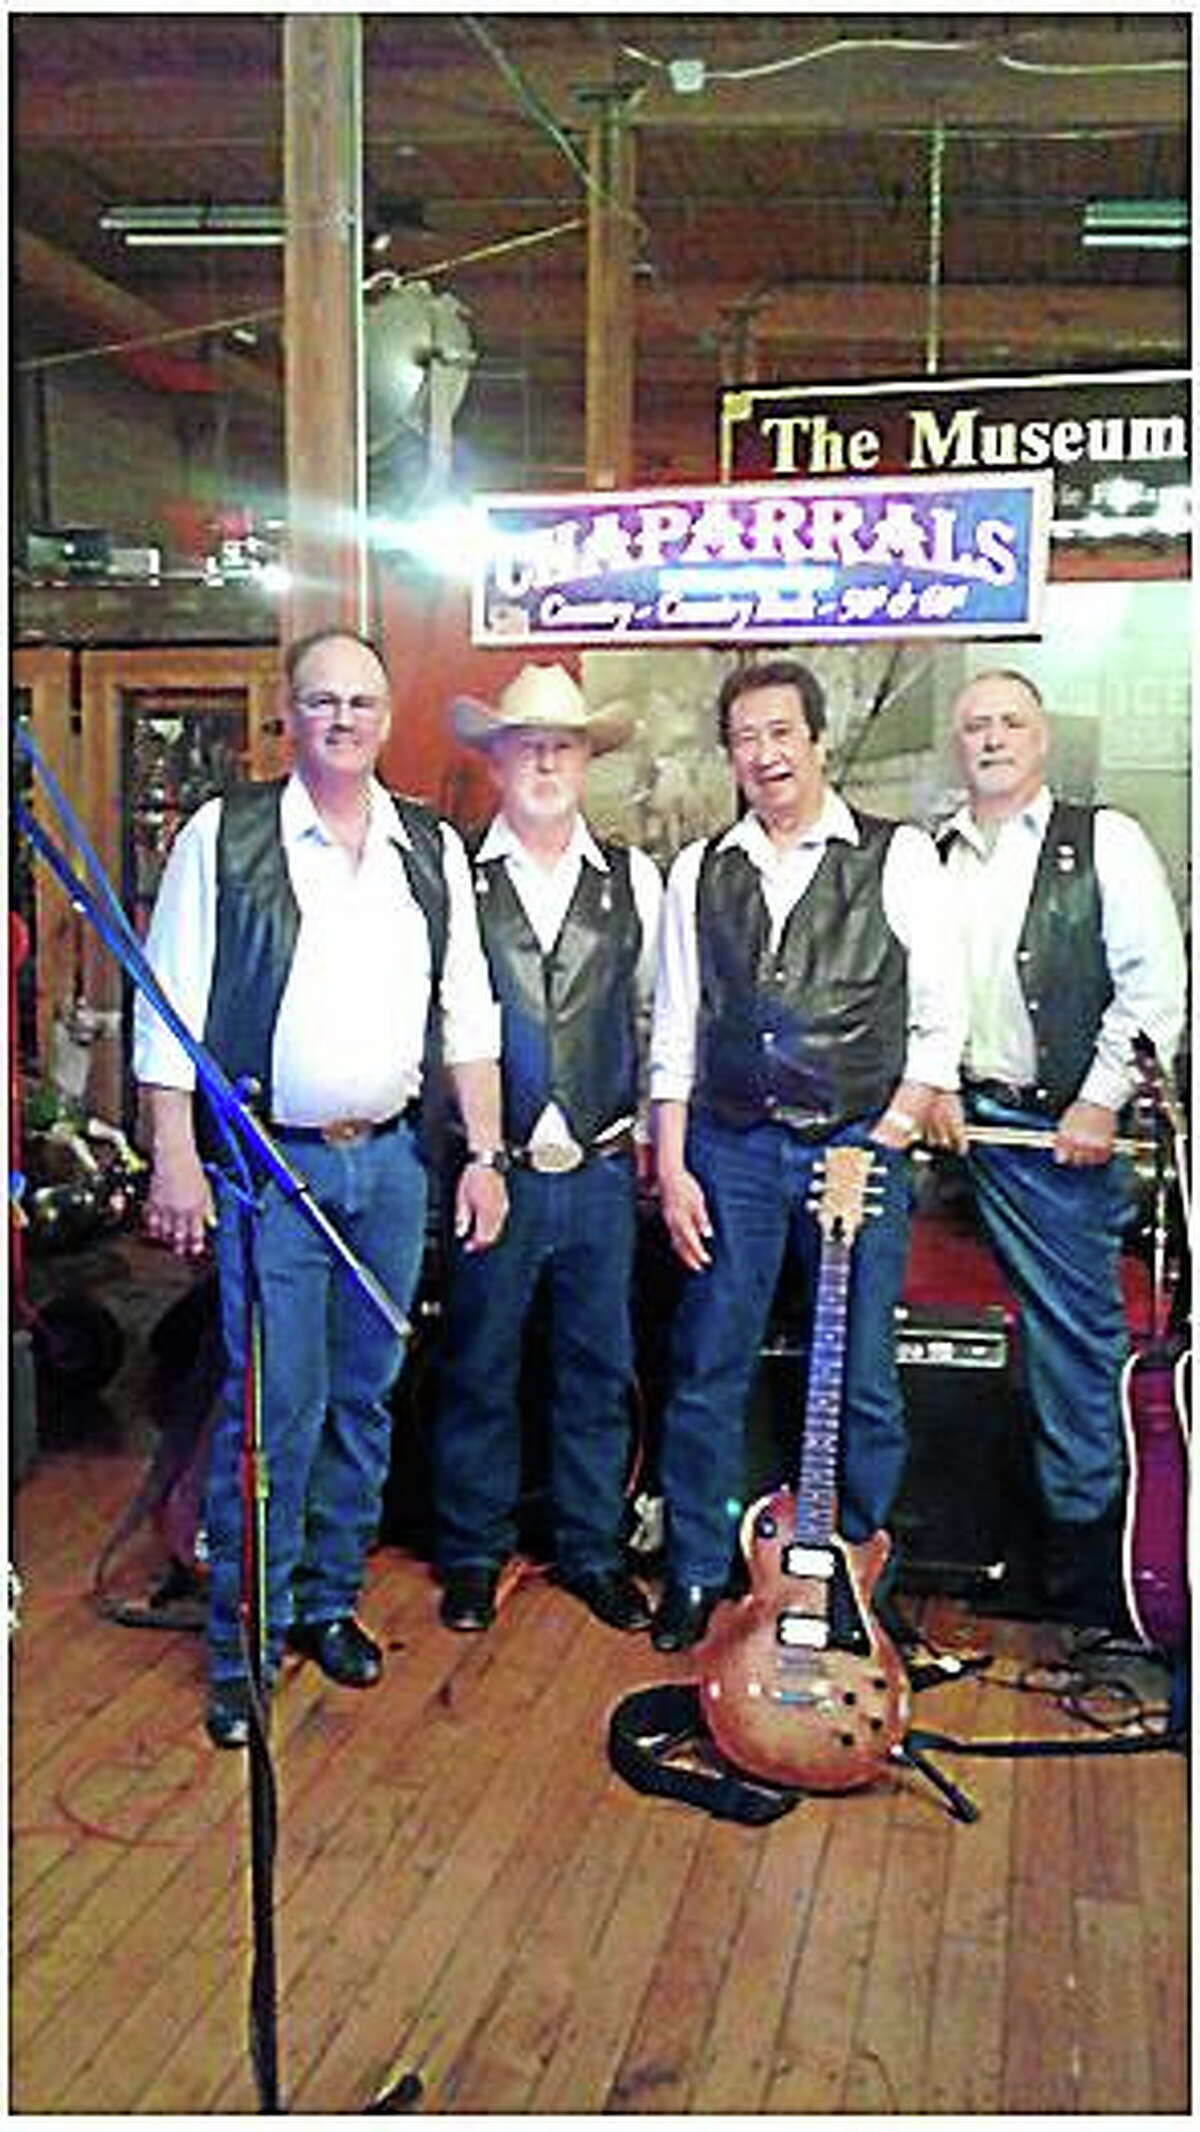 Contributed photo The Chaparrals will play a benefit concert Dec. 12 at the New England Carousel Museum to benefit the Burlington Congregational Church's efforts to purchase a new organ.